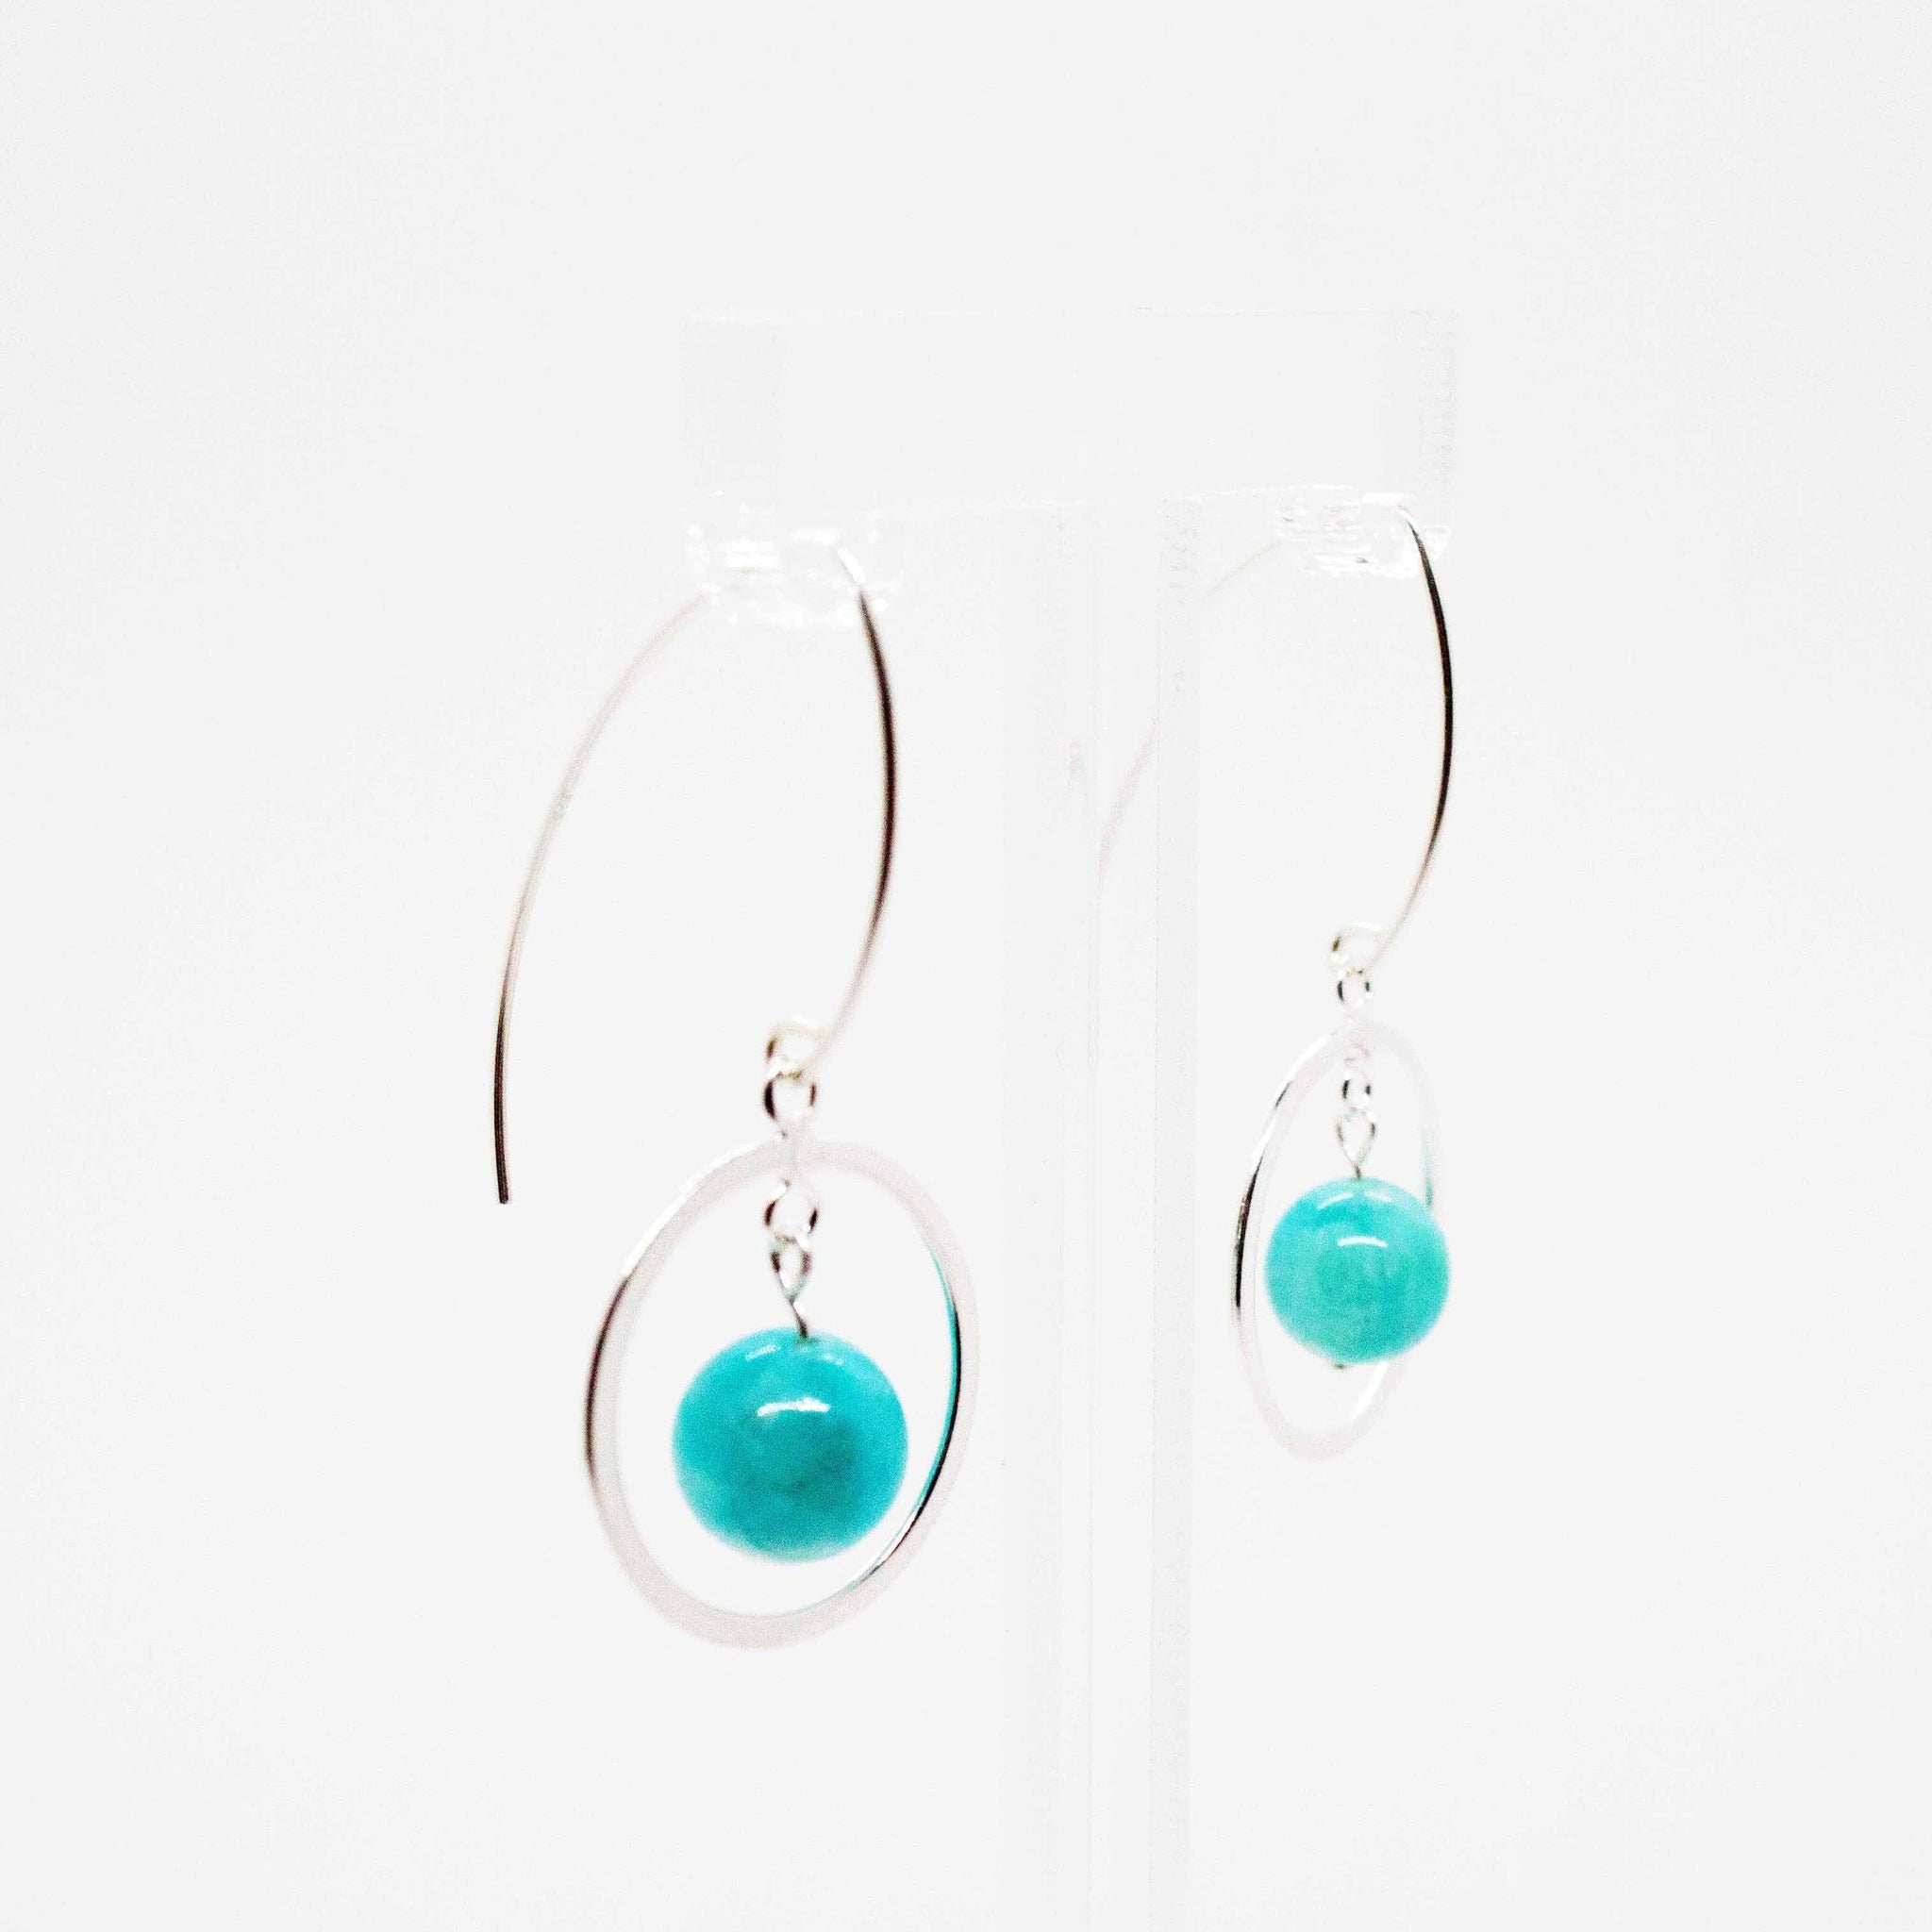 Light and summery, these amazonite and silver earrings will brighten every summer day! 1.5" earrings made with amazonite beads on sterling silver hoops and earring hooks hypo-allergenic and sensitive ear friendly. Handmade in Toronto by kp jewelry co.